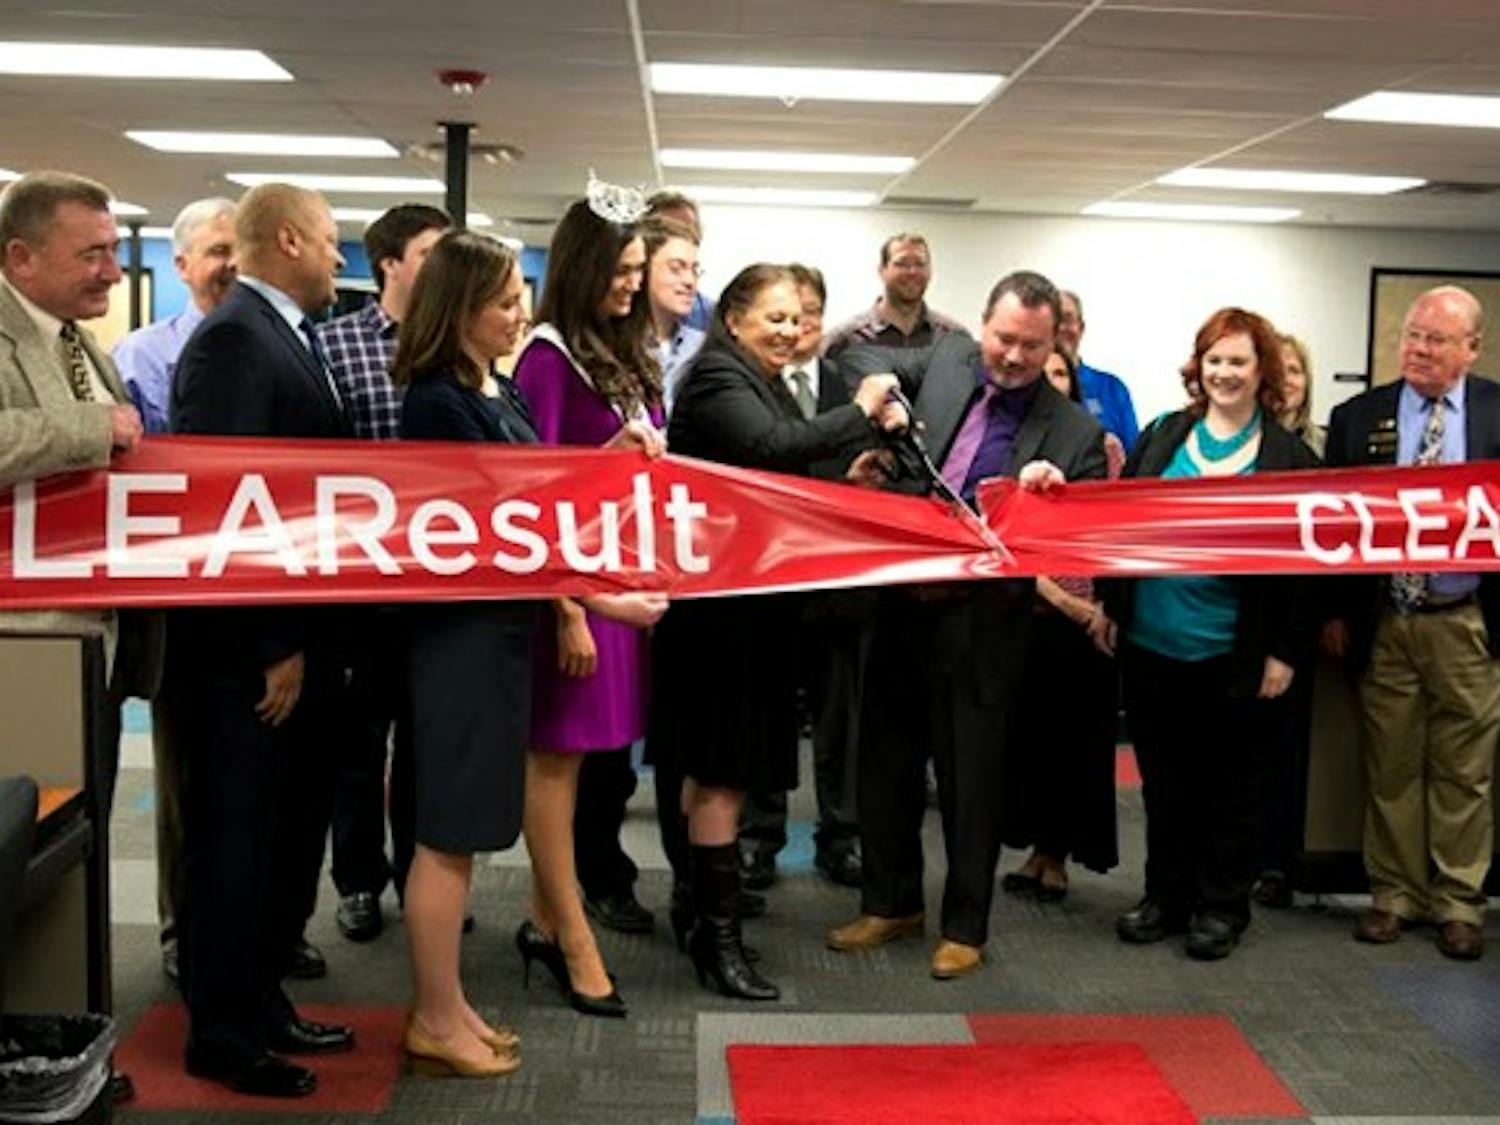 CustomerLink Vice President Frank Royal and Tempe Chamber of Commerce board member Mary Palomino cut the ribbon on the new CLEAResult call center in Tempe. The company hopes to create 200 jobs in Tempe by the end of 2015. (Photo by Andrew Ybanez)